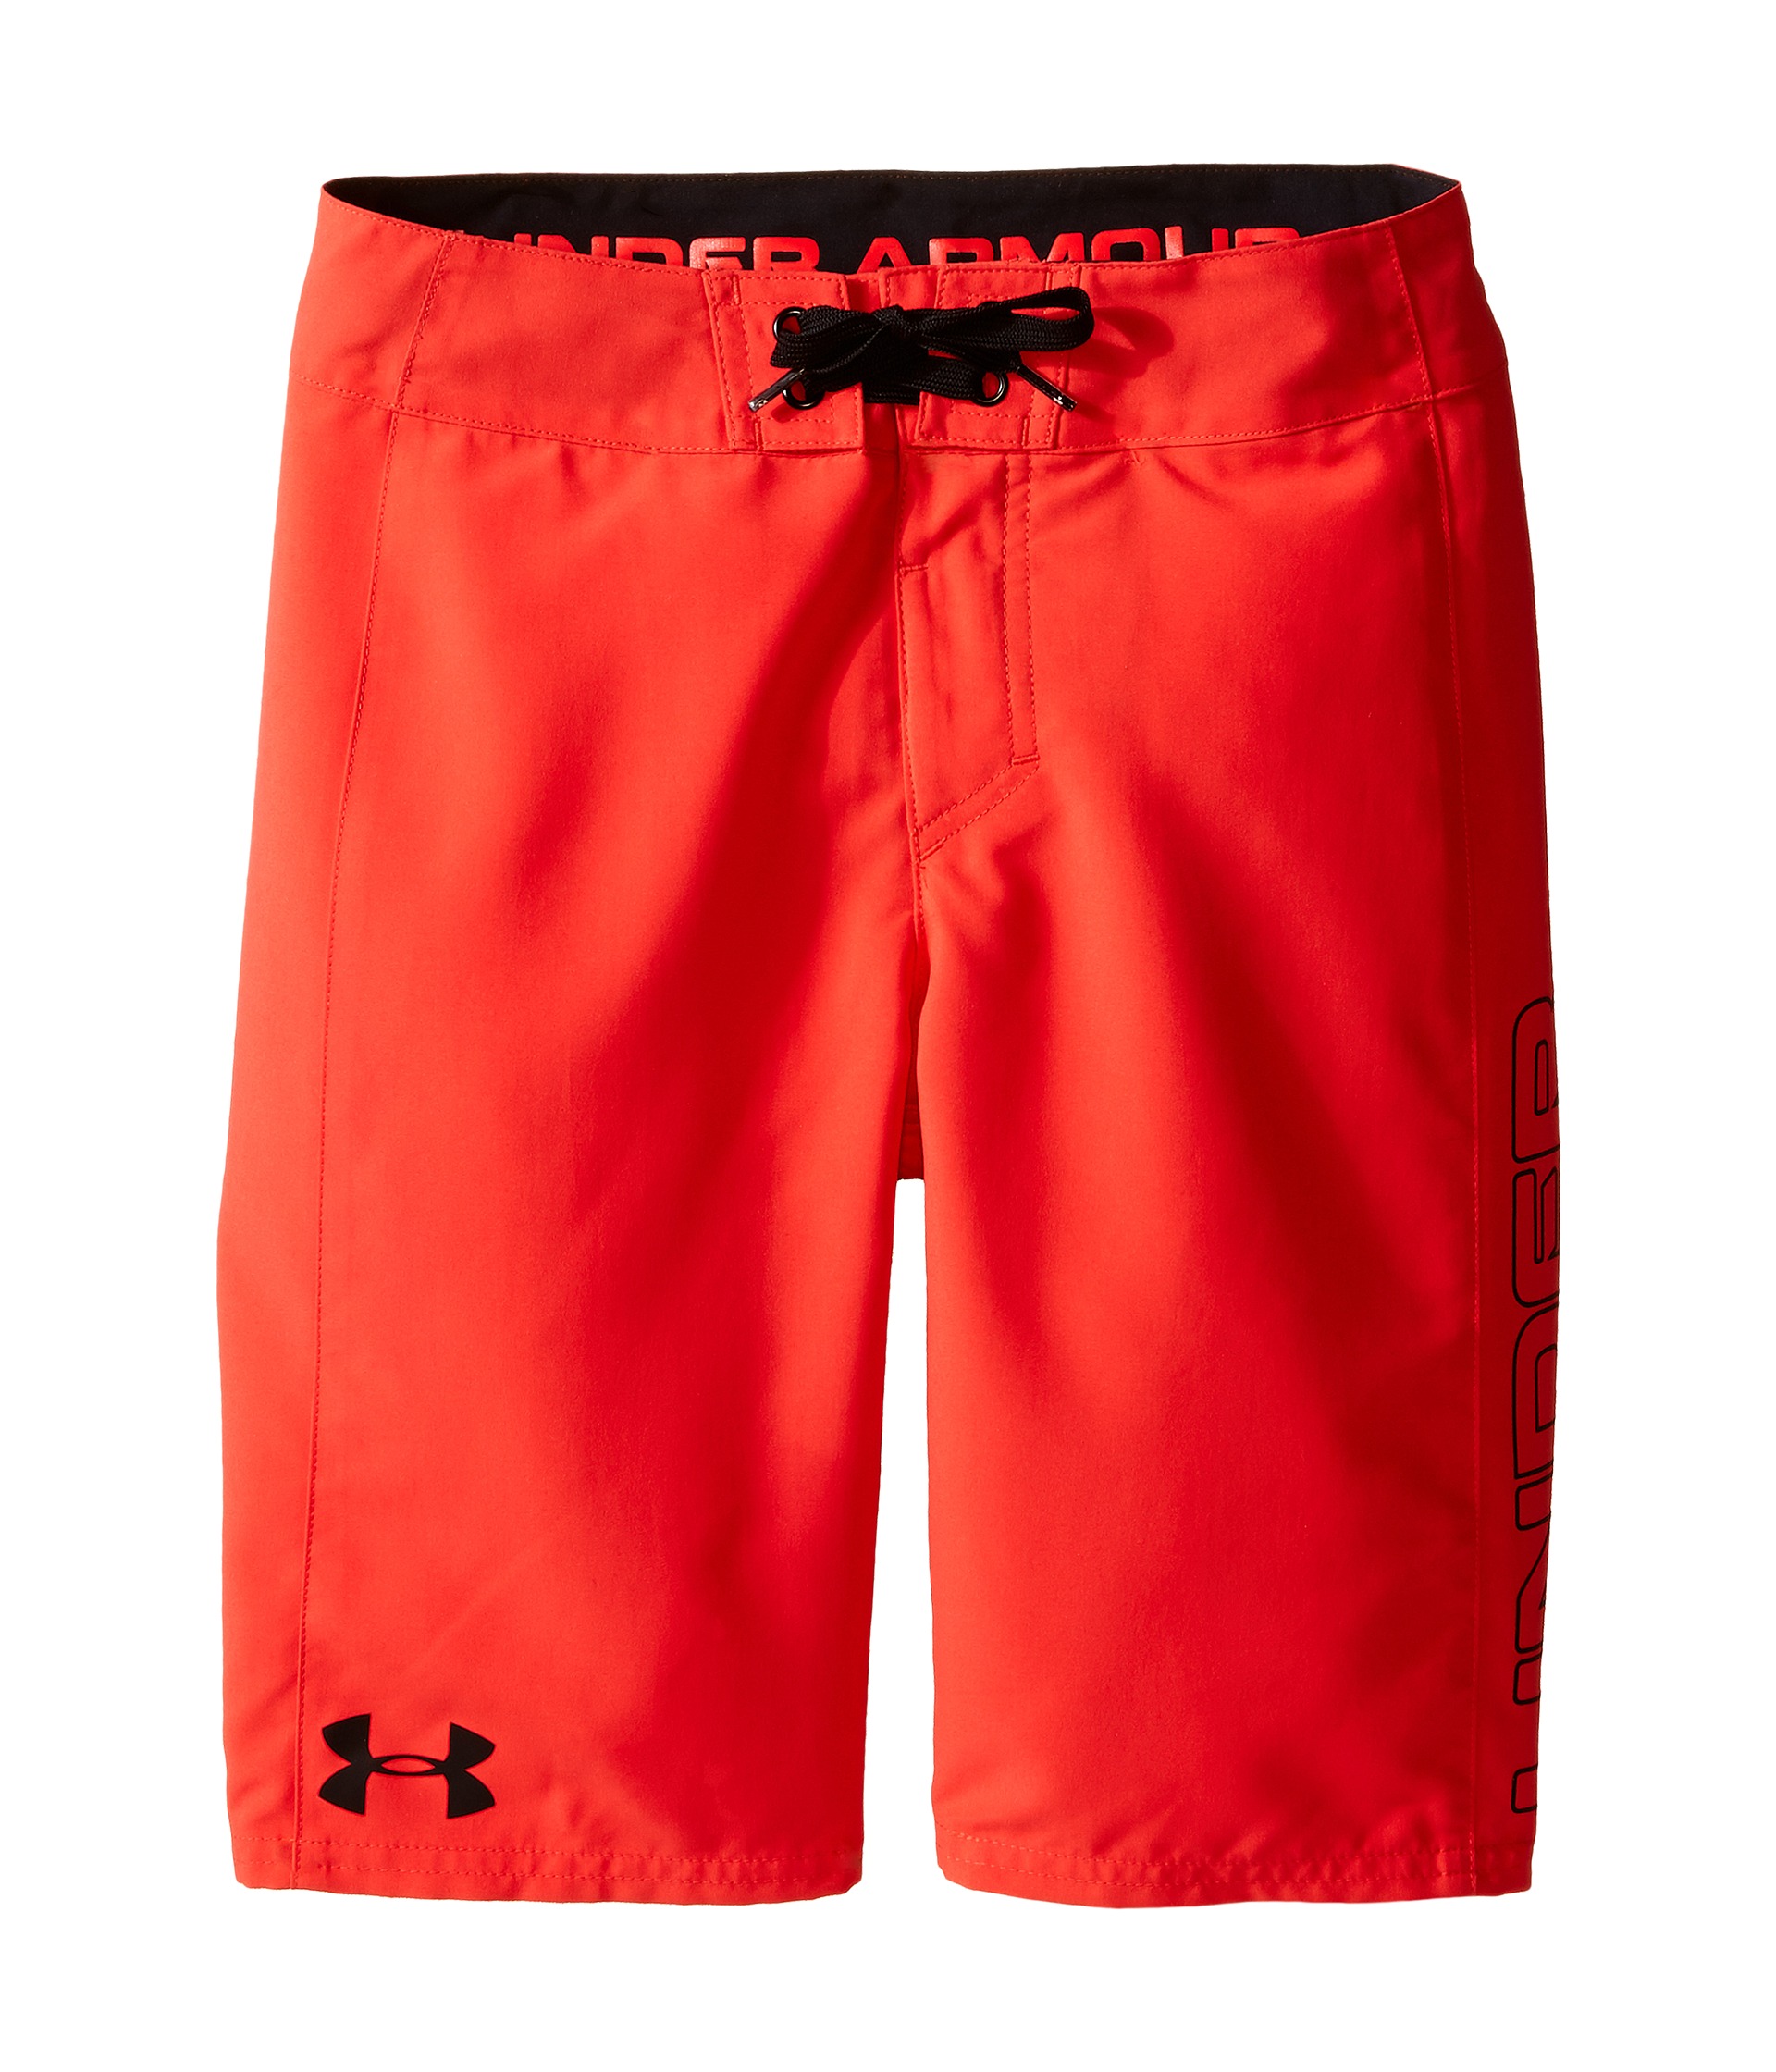 Under Armour Kids Ua Hiit Boardshorts Big Kids Rocket Red, Red, Under Armour